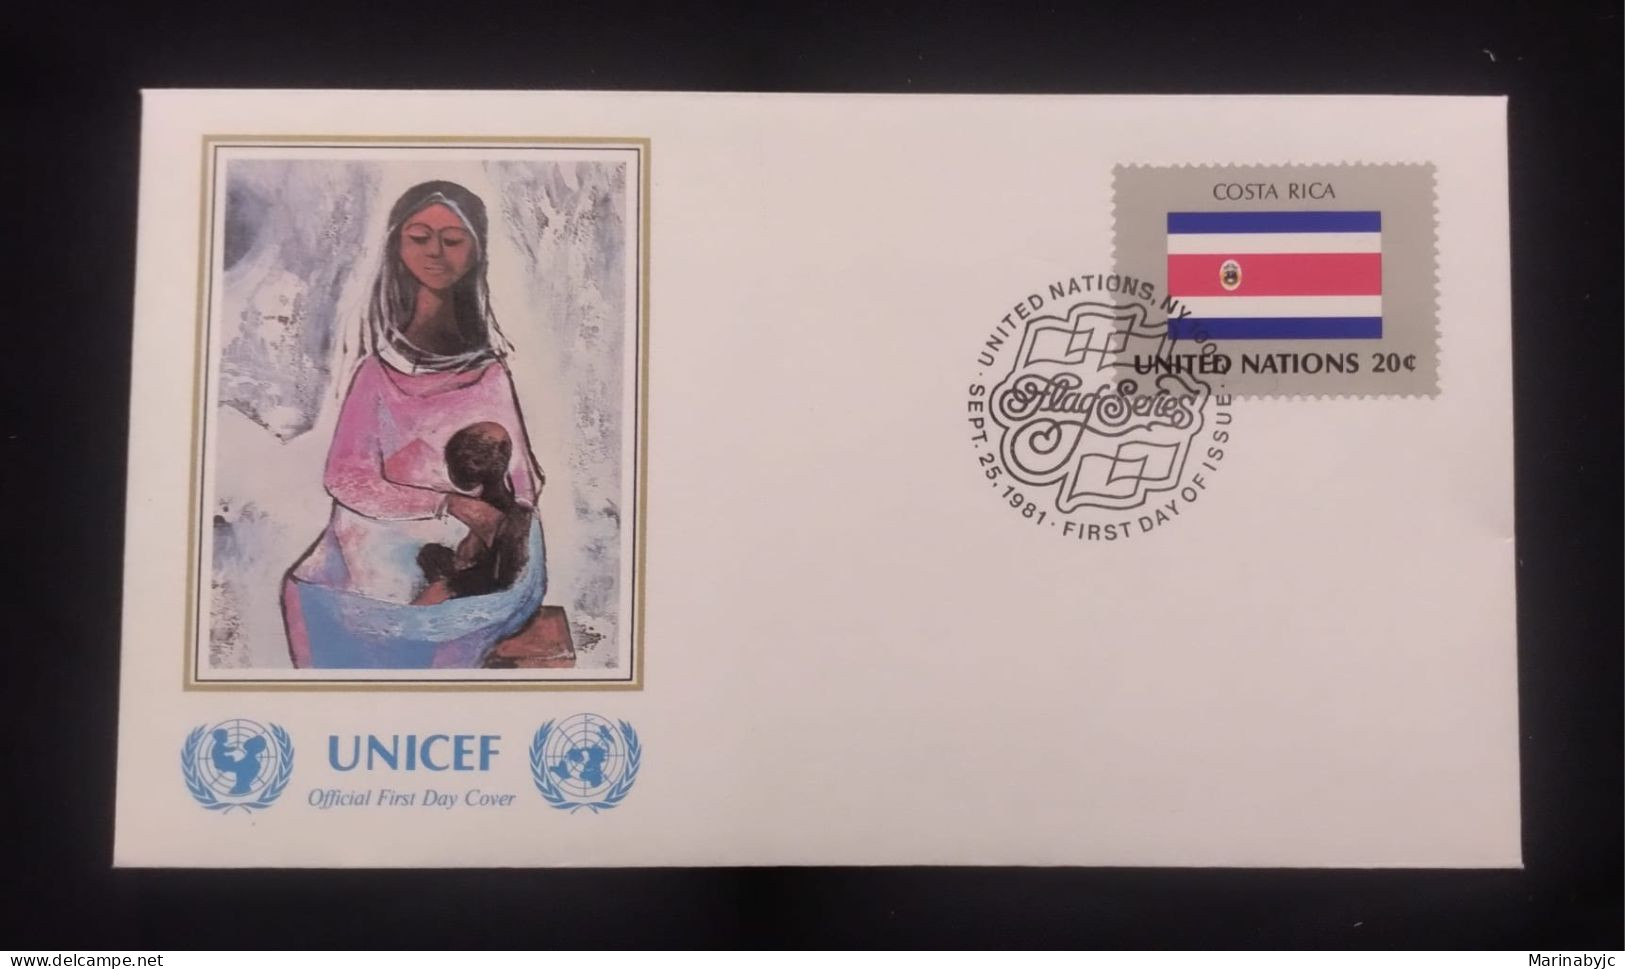 EL)1980 UNITED NATIONS, NATIONAL FLAG OF THE MEMBER COUNTRIES, COSTA RICA, ART - MOTHER AND CHILD PAINTING, UNICEF, FDC - Nuevos